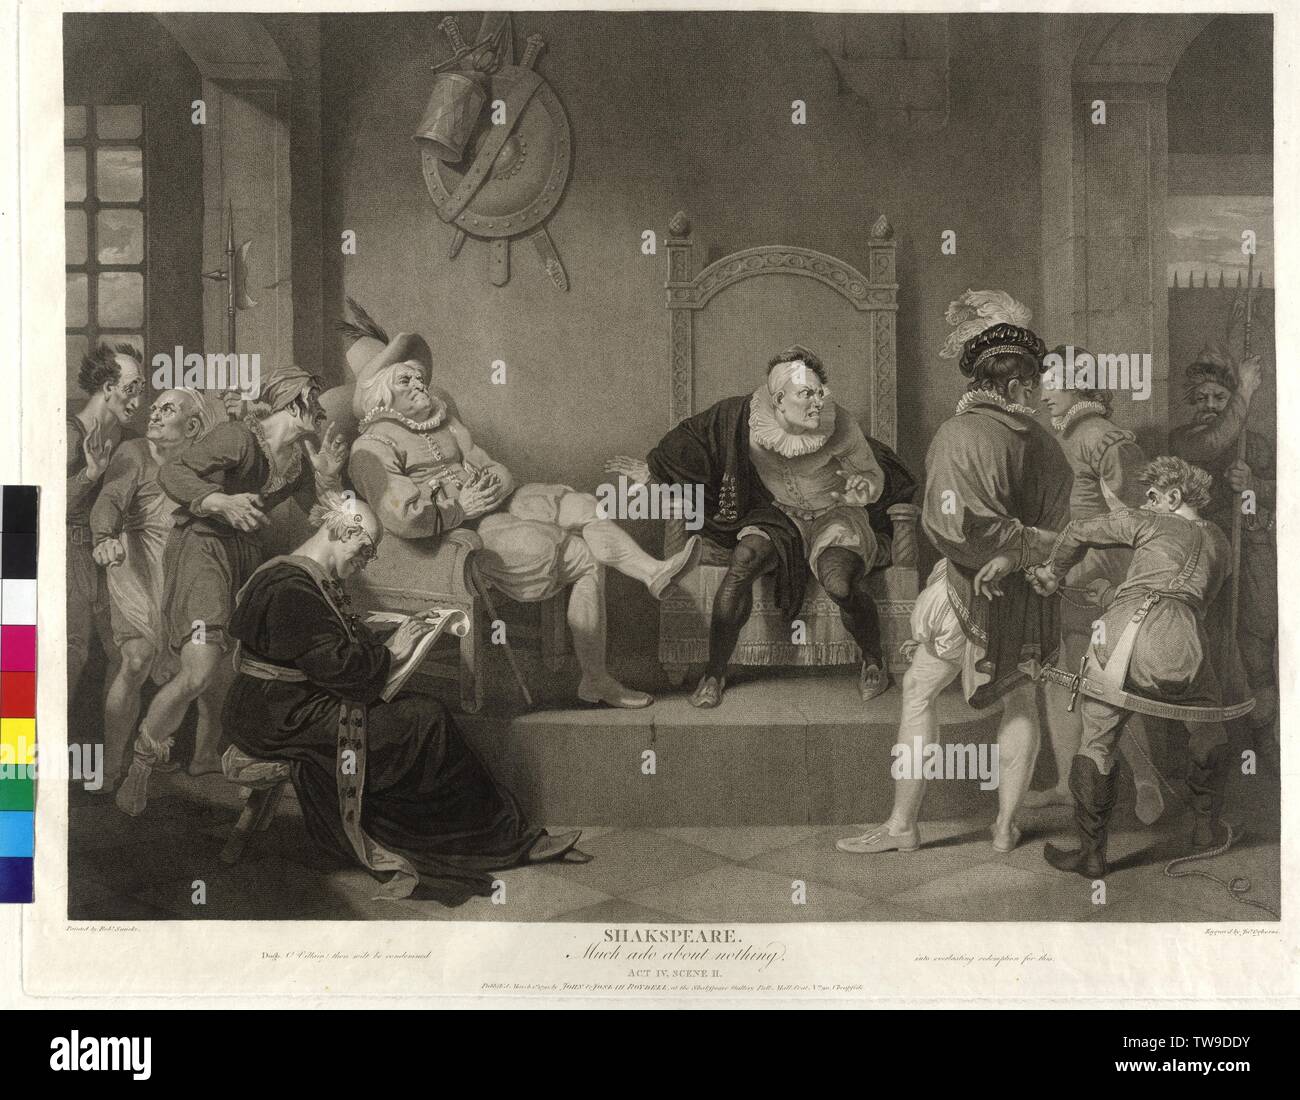 William Shakespeare: Much Ado About Nothing, production design, act IV, scene II, in the prison of Messina: Konrad and his ally Borachio turning in front of Constable Dogberry and Verges taxes. The court reporter Seacoal sitting in the foreground and power yourself annotation engraving in stippling by John Ogborne based on painting by Robert Smirke, sheet from the Shakespeare-Gallery von John Boydell, Additional-Rights-Clearance-Info-Not-Available Stock Photo